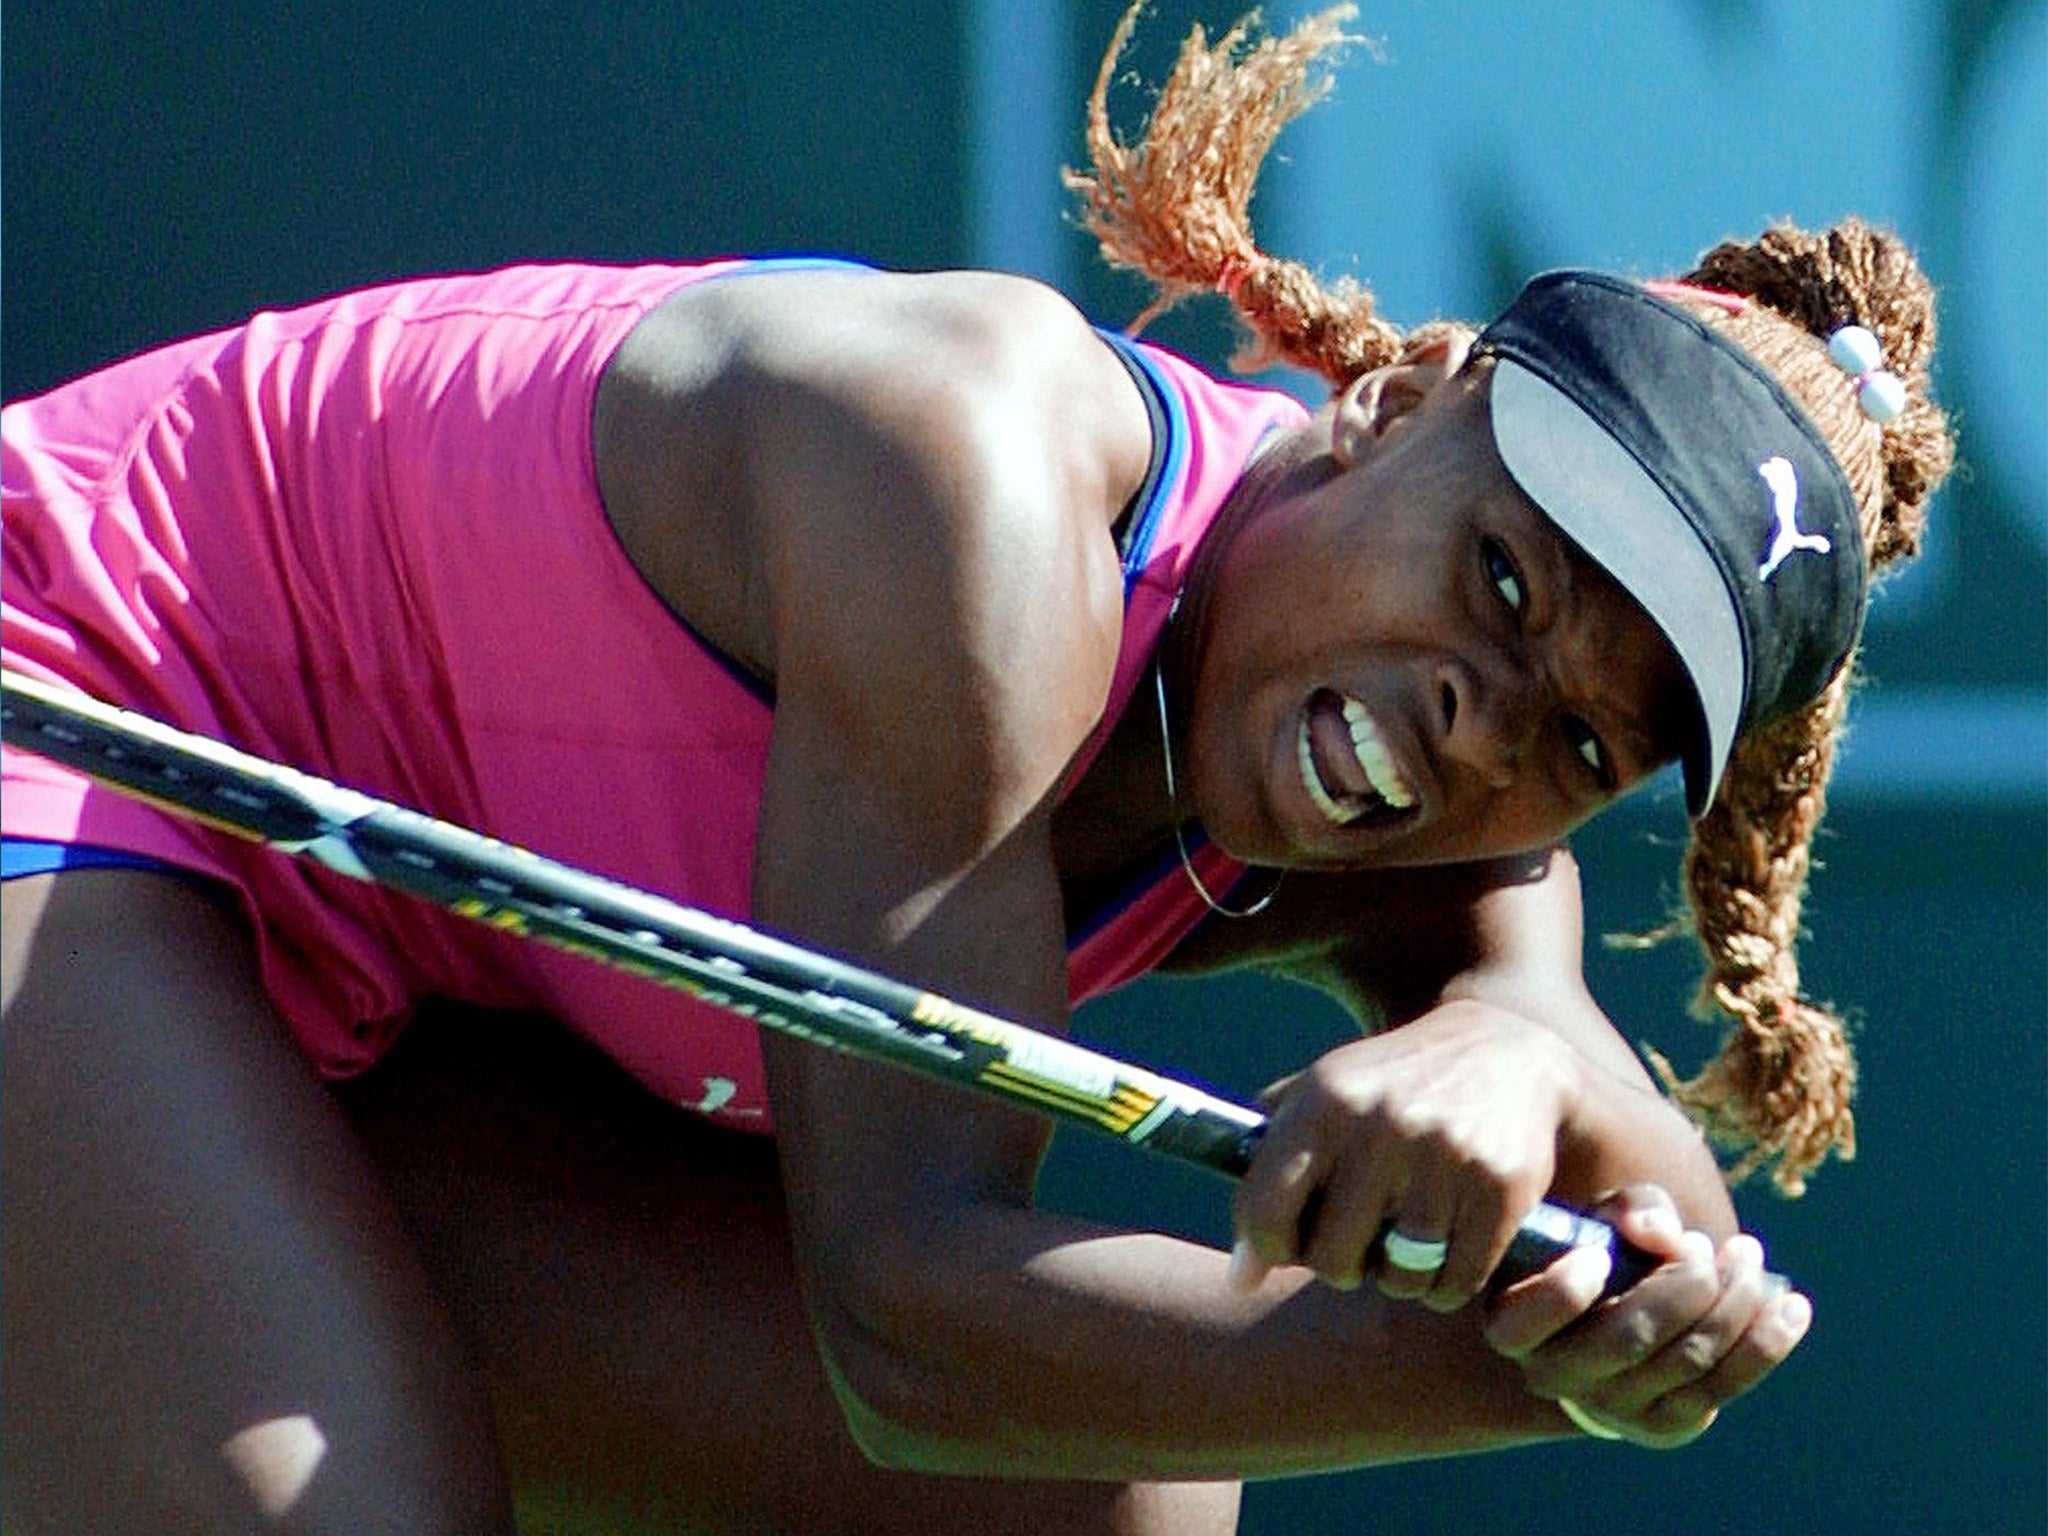 Serena Williams at her last match at Indian Wells in 2001